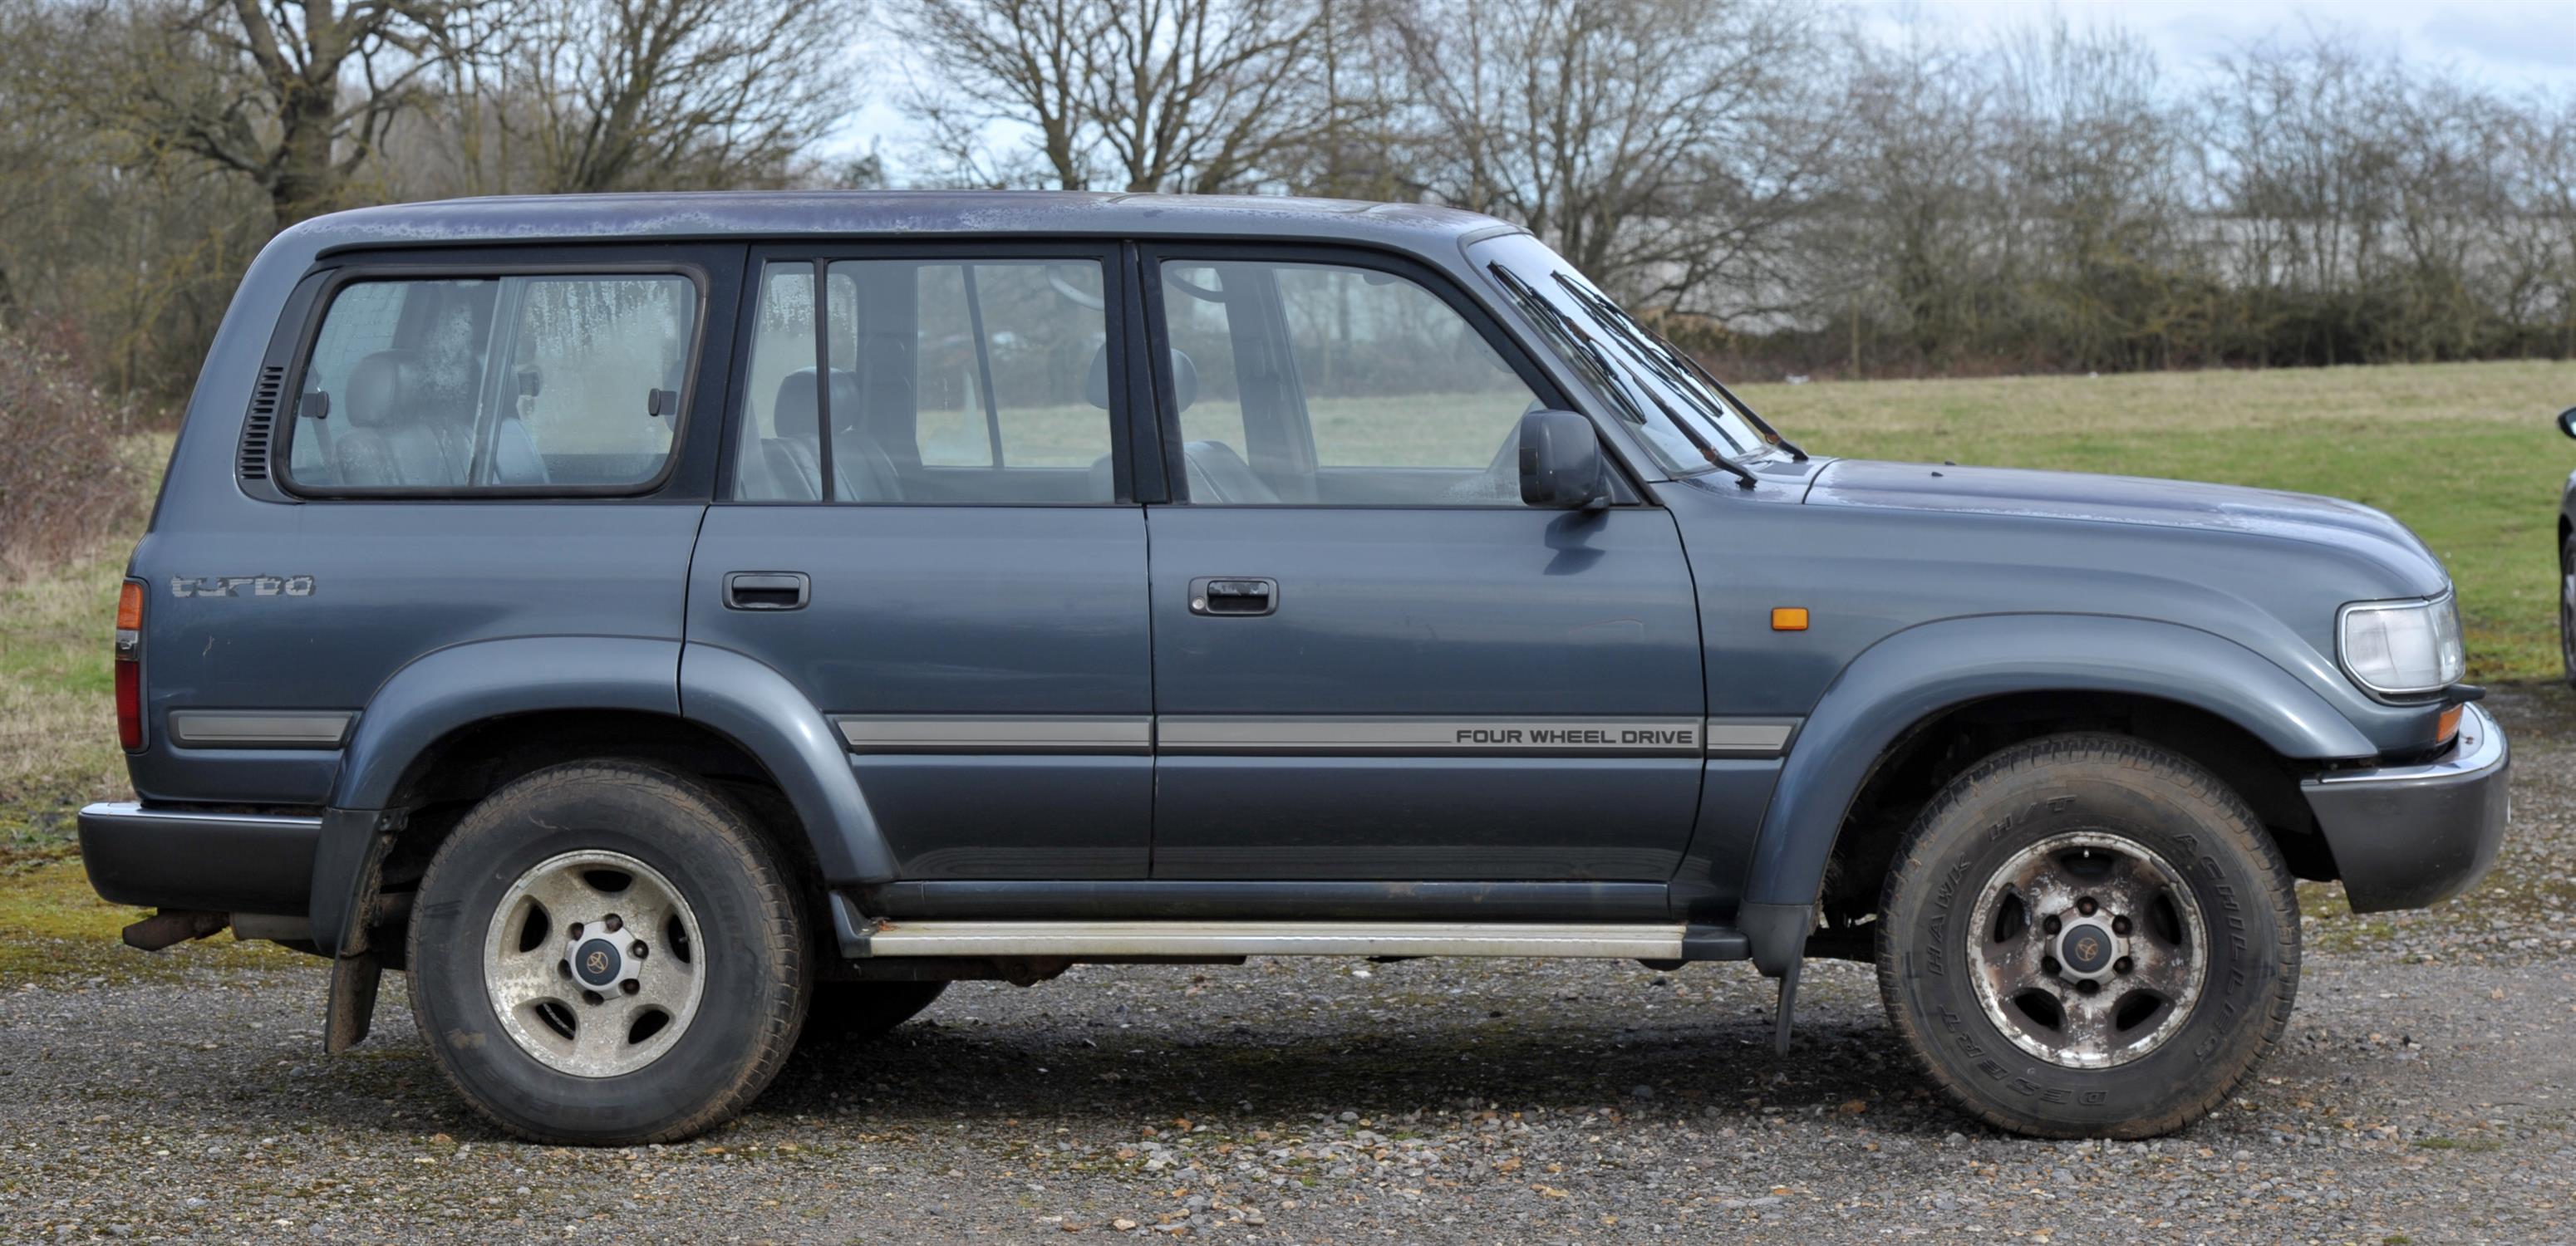 1993 Toyota Land Cruiser VX 80 series 4.2 Diesel Automatic. Registration number: L253 ABL. - Image 3 of 14